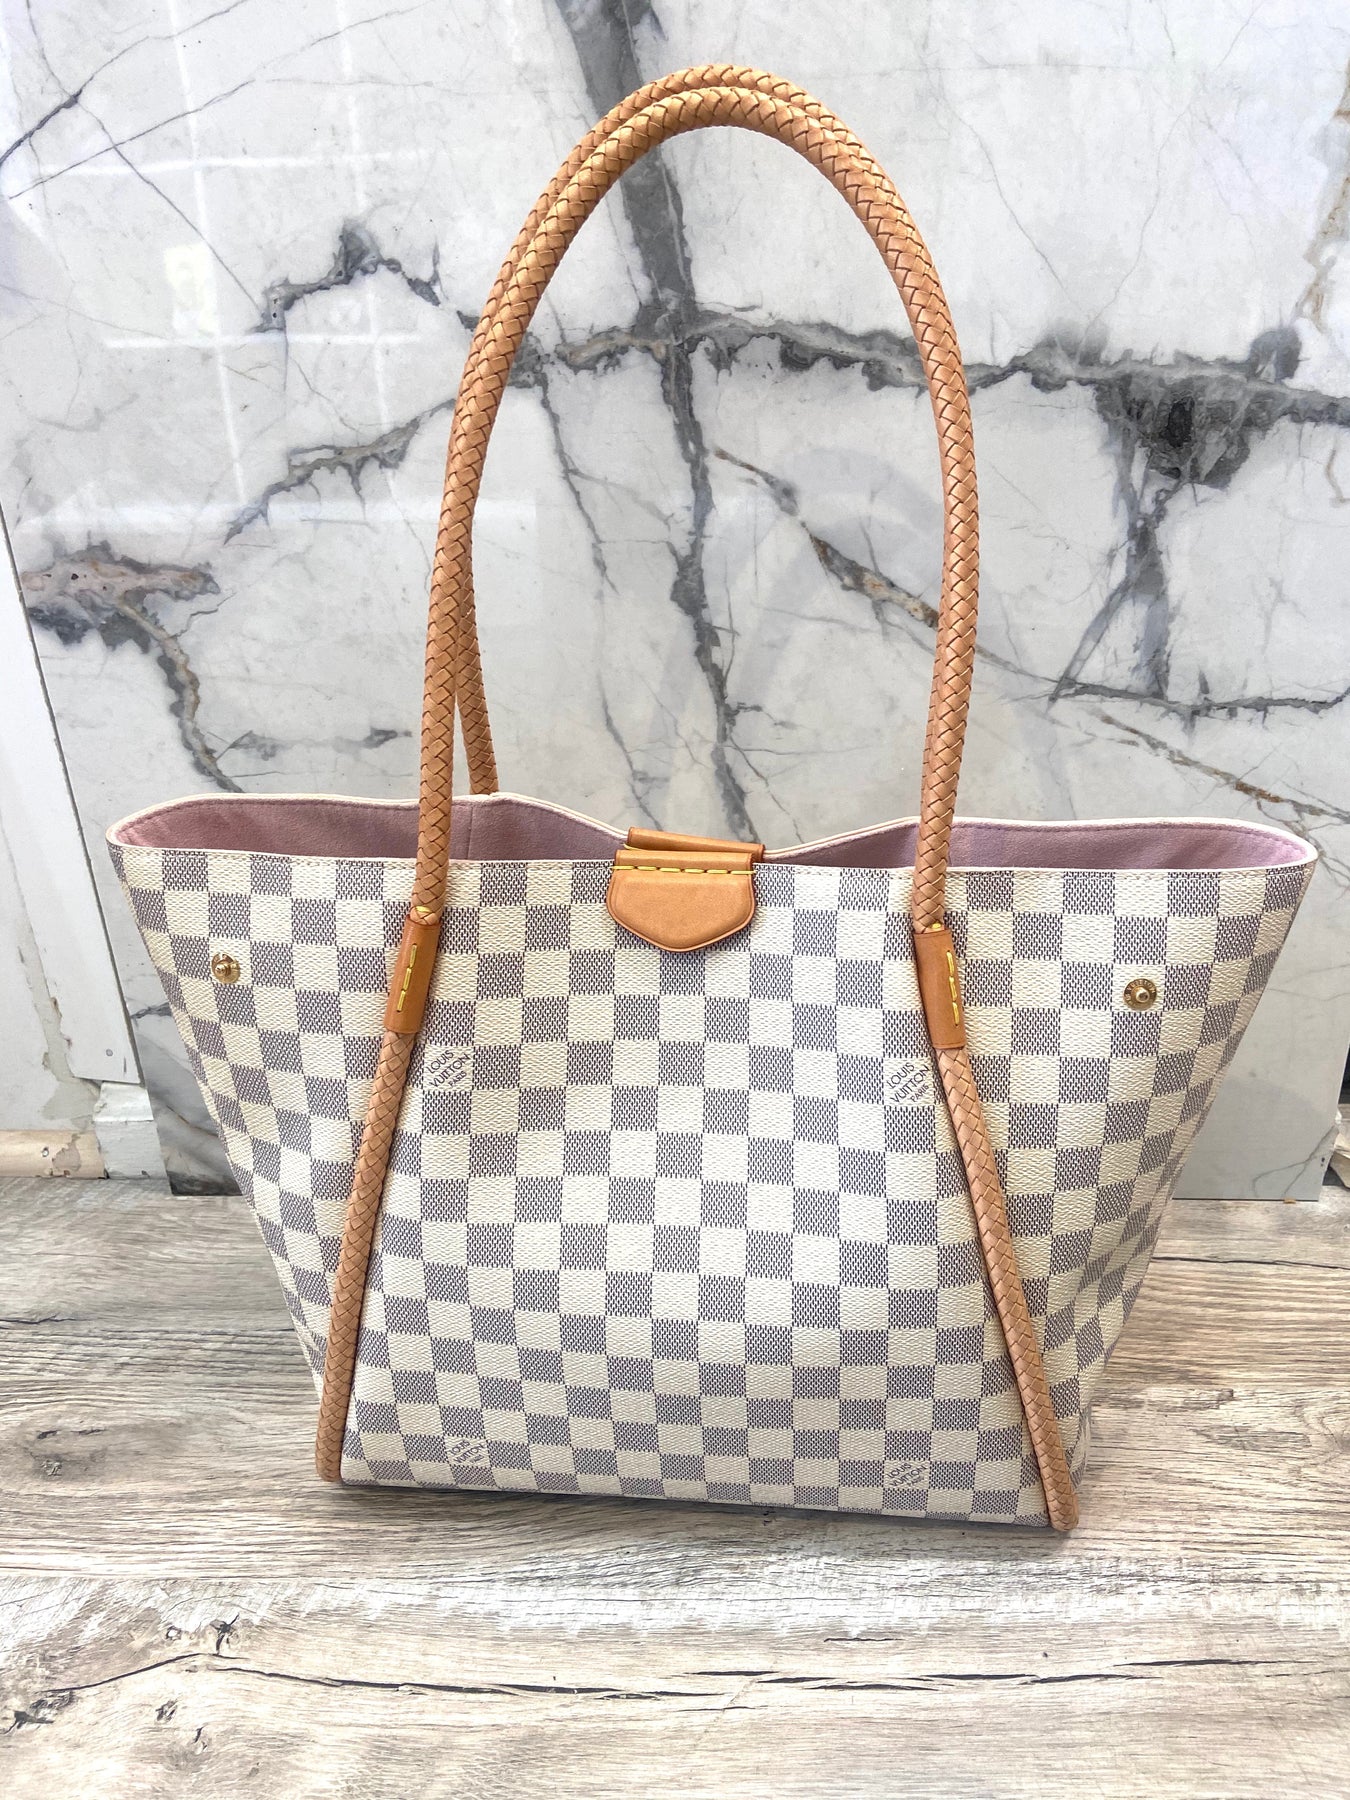 LOUIS VUITTON PROPRIANO DAMIER AZUR TOTE NEW CONDITION. $1690. A MOST HAVE.  #lv #propriano☀️ #lvtotebags #resale #resaleluxury…